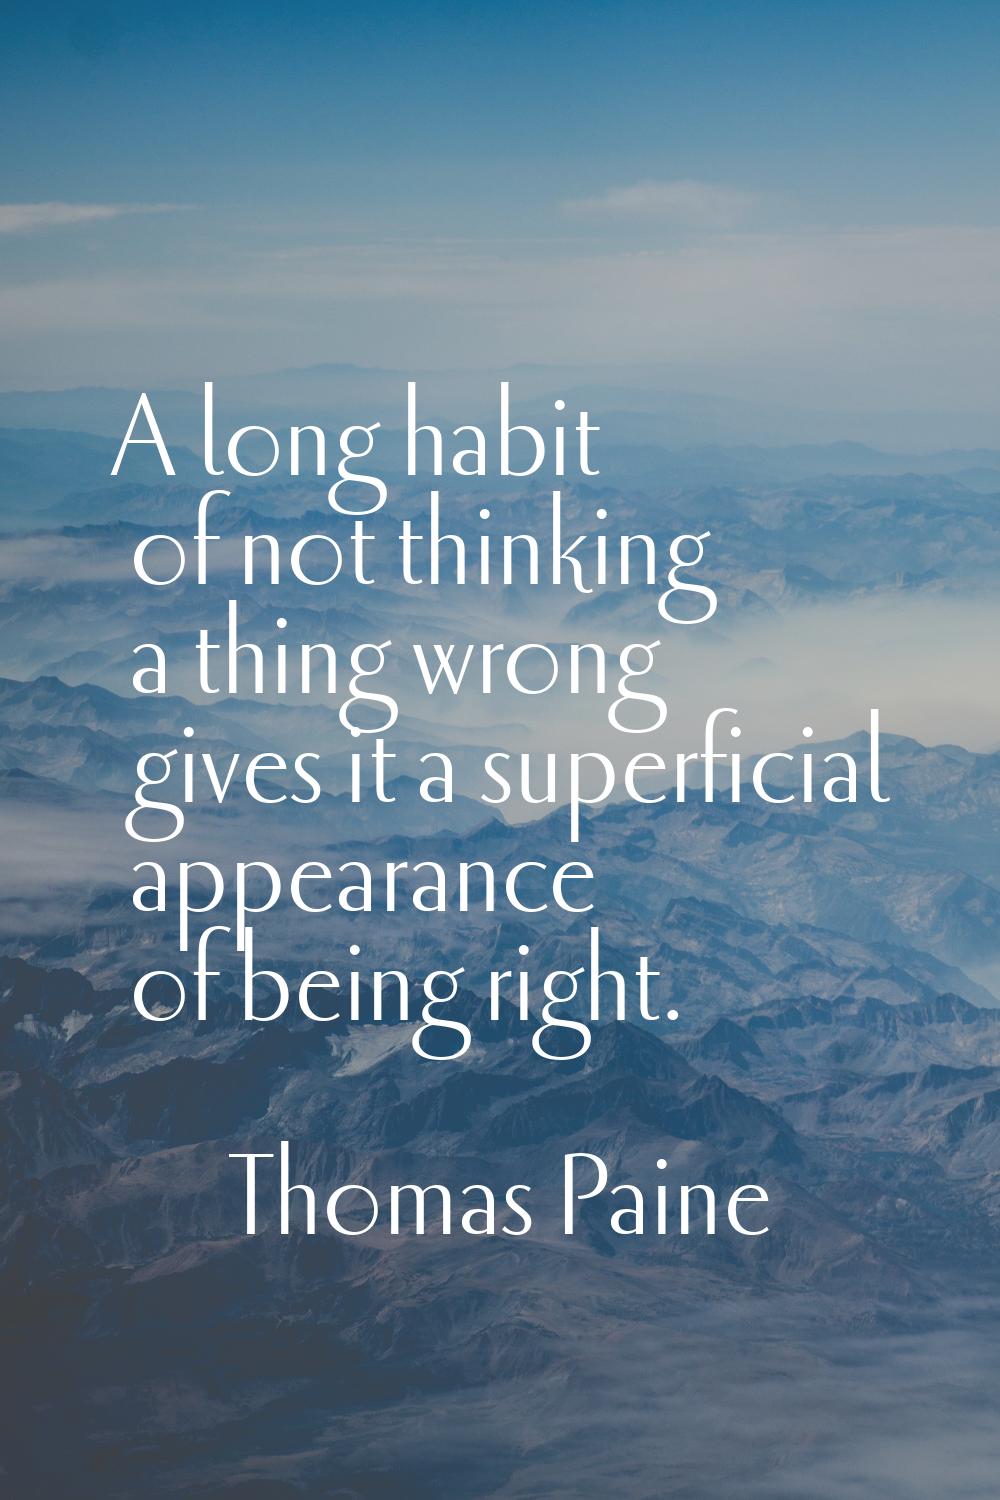 A long habit of not thinking a thing wrong gives it a superficial appearance of being right.